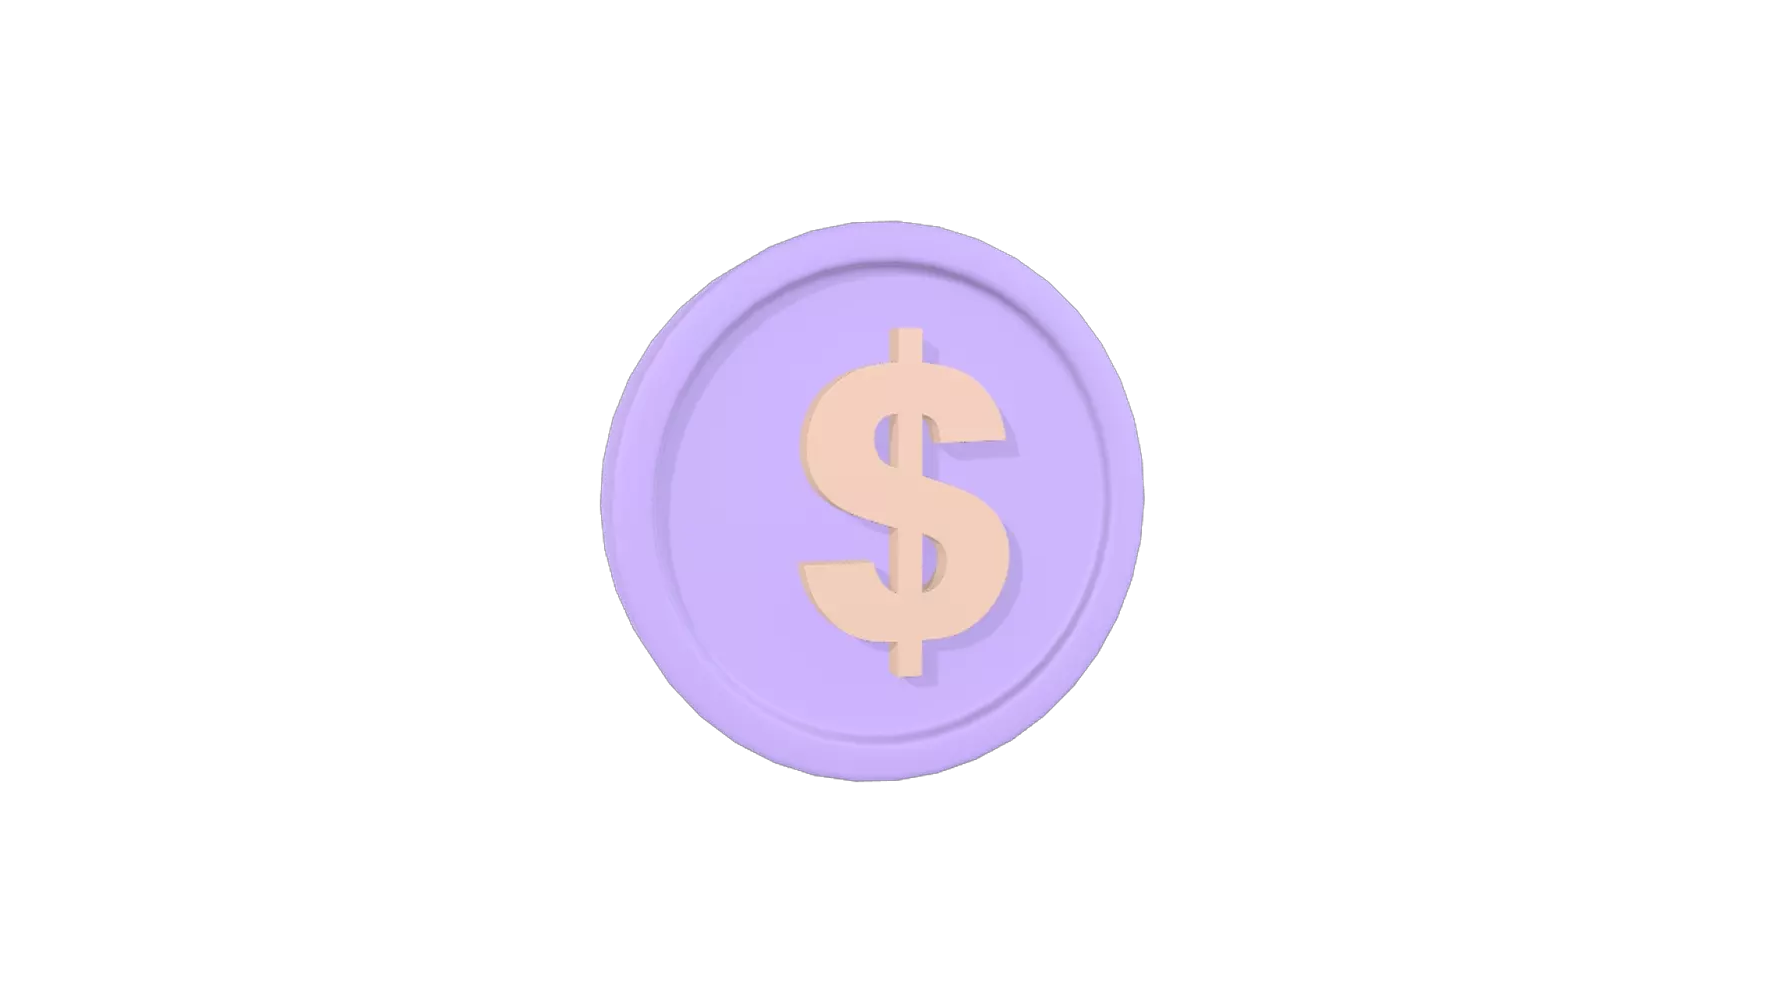 Dollar Coin 3D Graphic